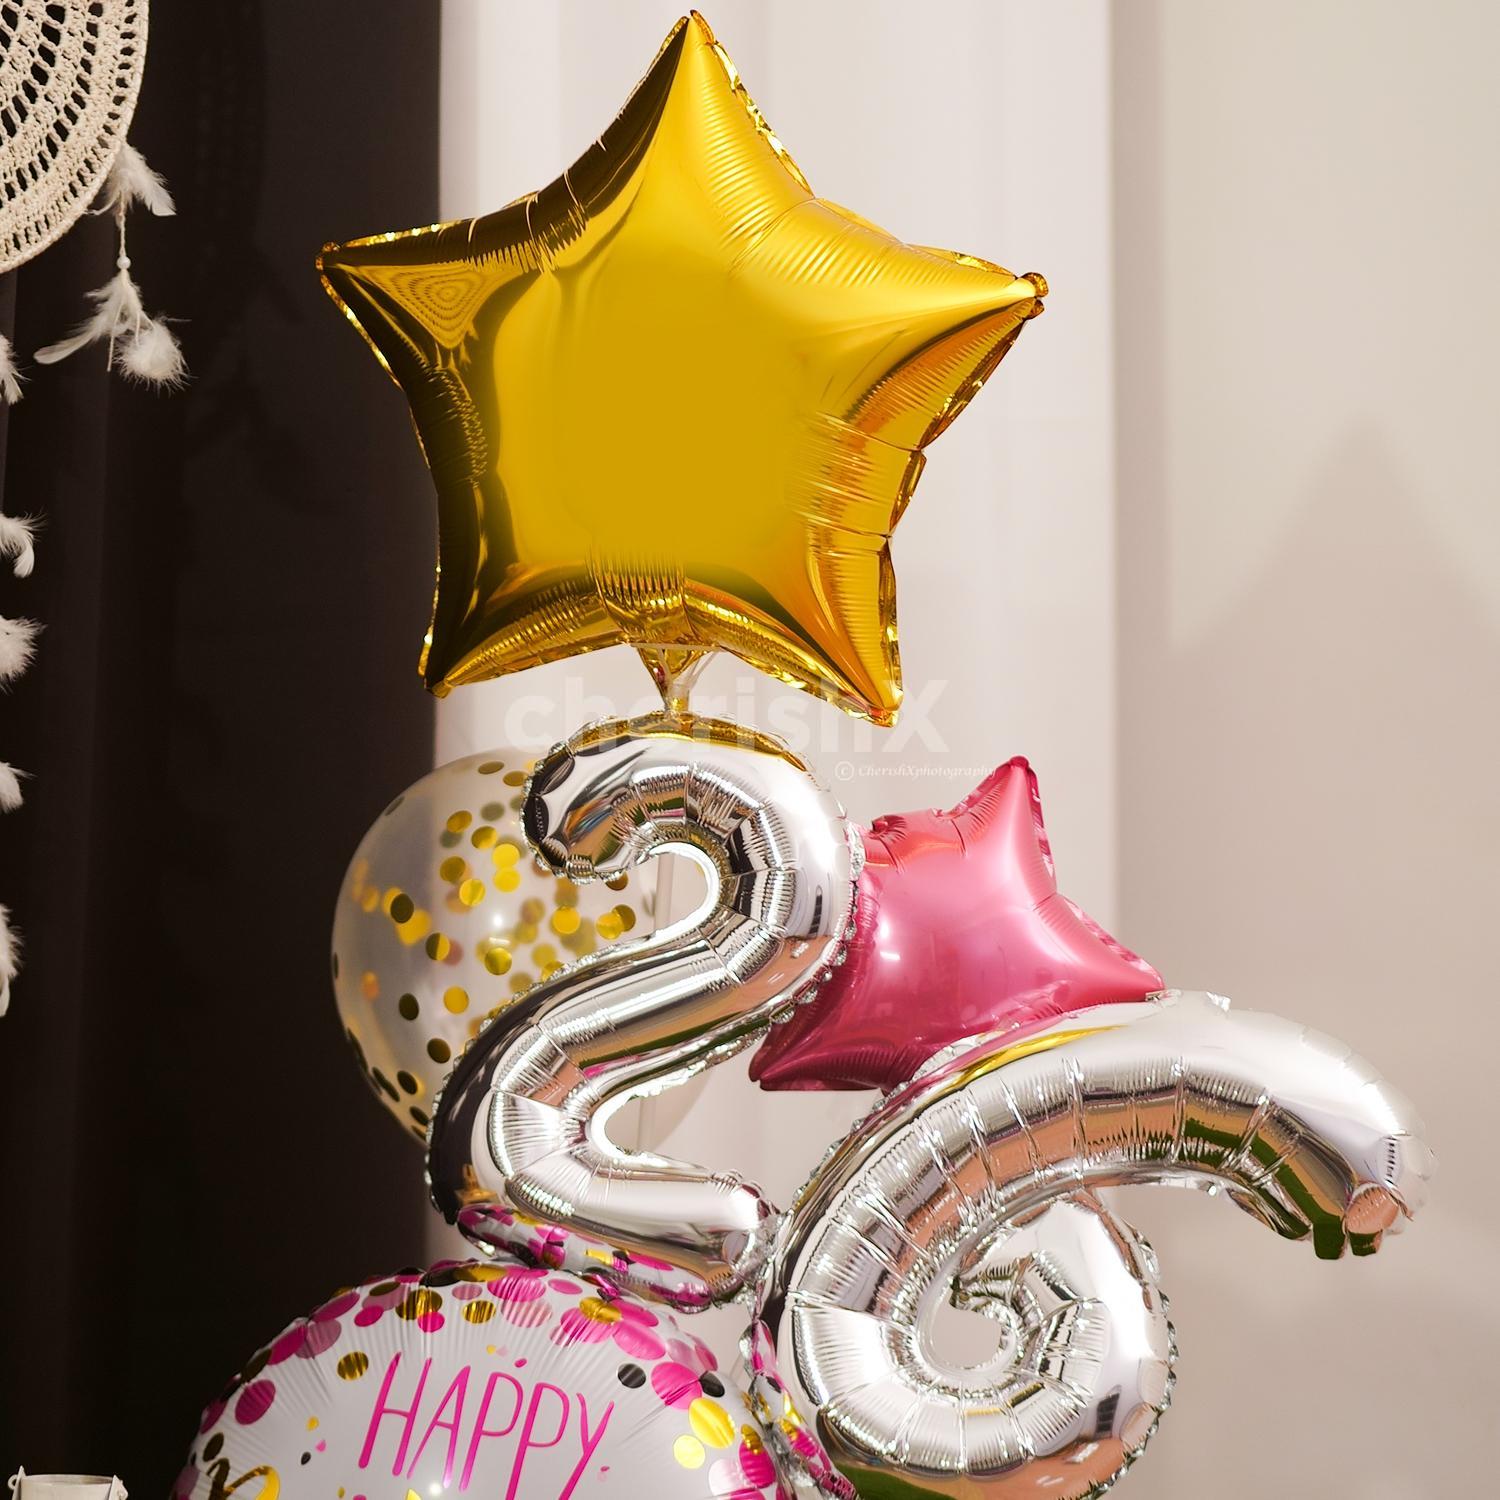 Make the birthday celebration special with this exclusive and gorgeous balloon bouquet